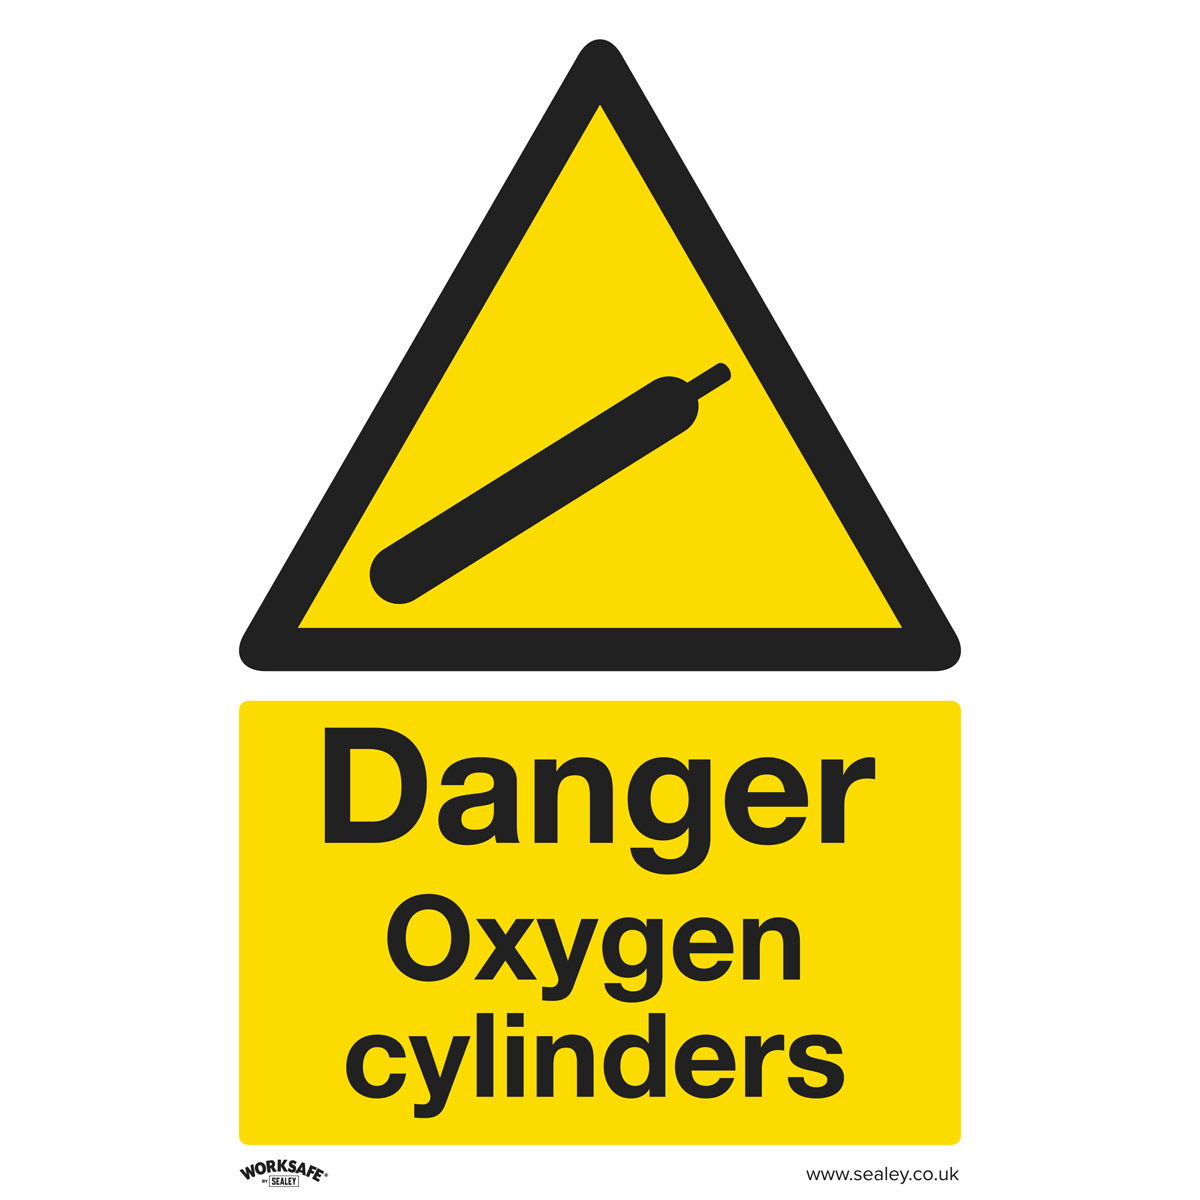 Warning Safety Sign - Danger Oxygen Cylinders - Self-Adhesive Vinyl - Pack of 10